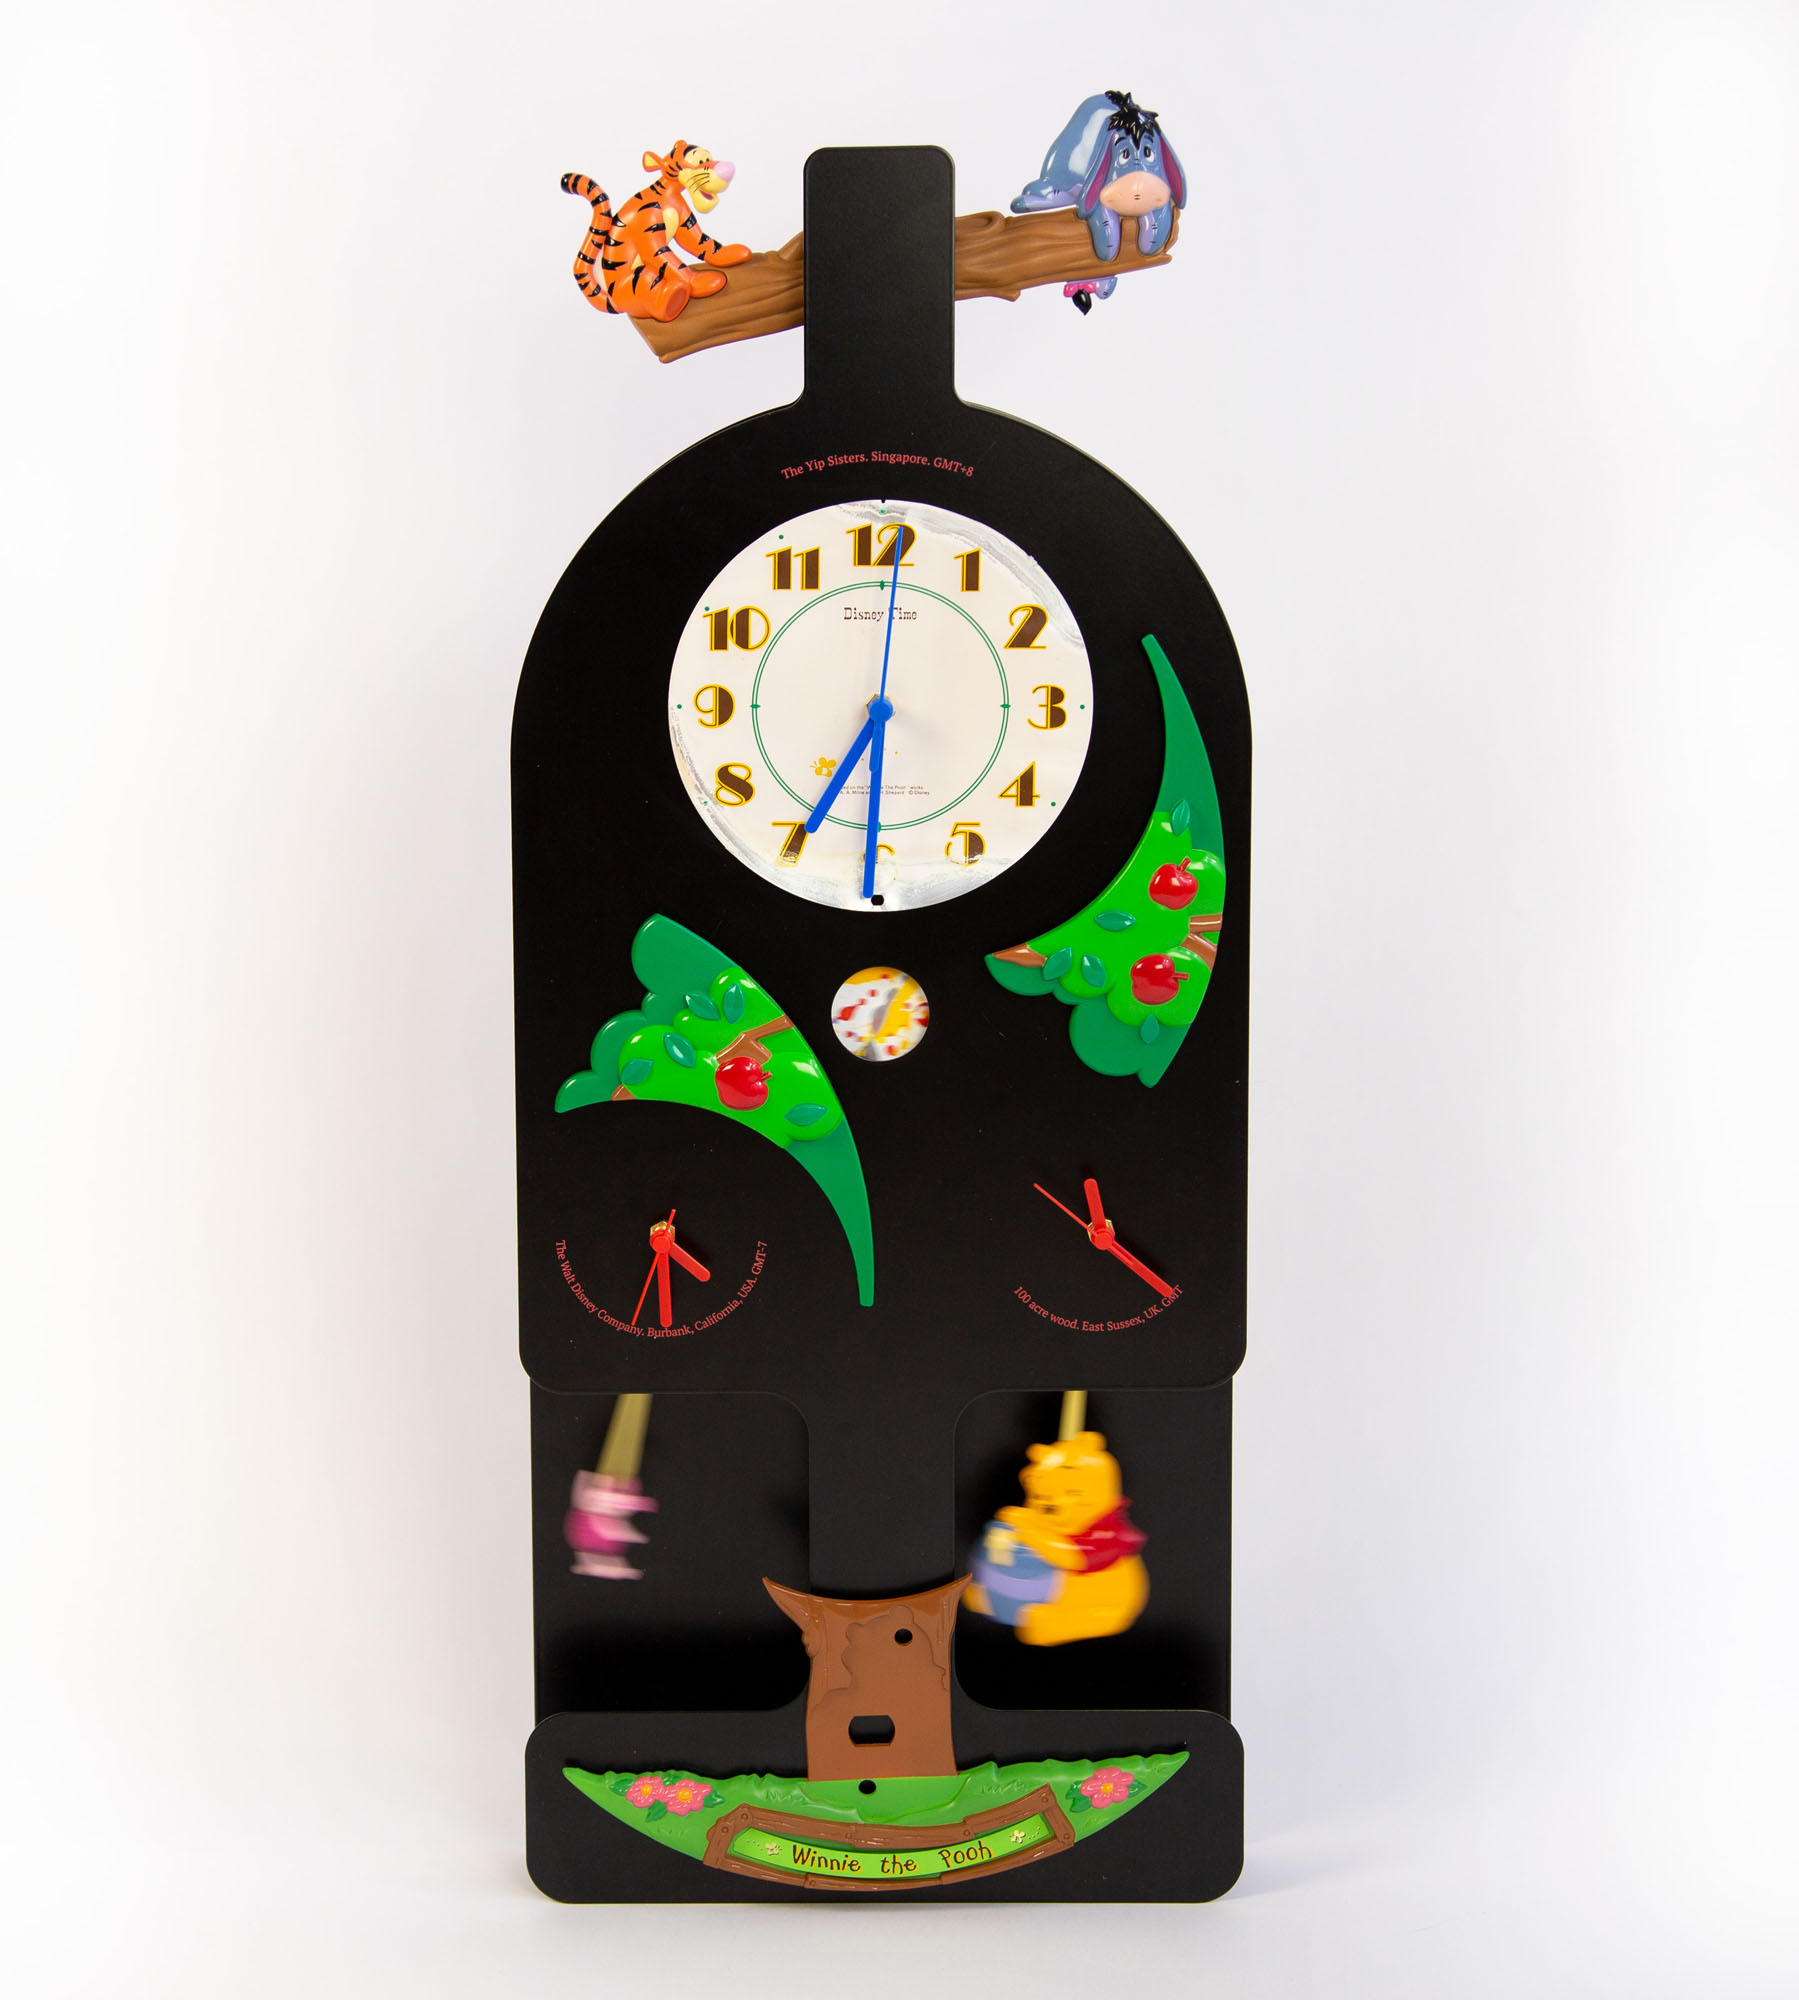 An image of a Winnie the Pooh themed clock